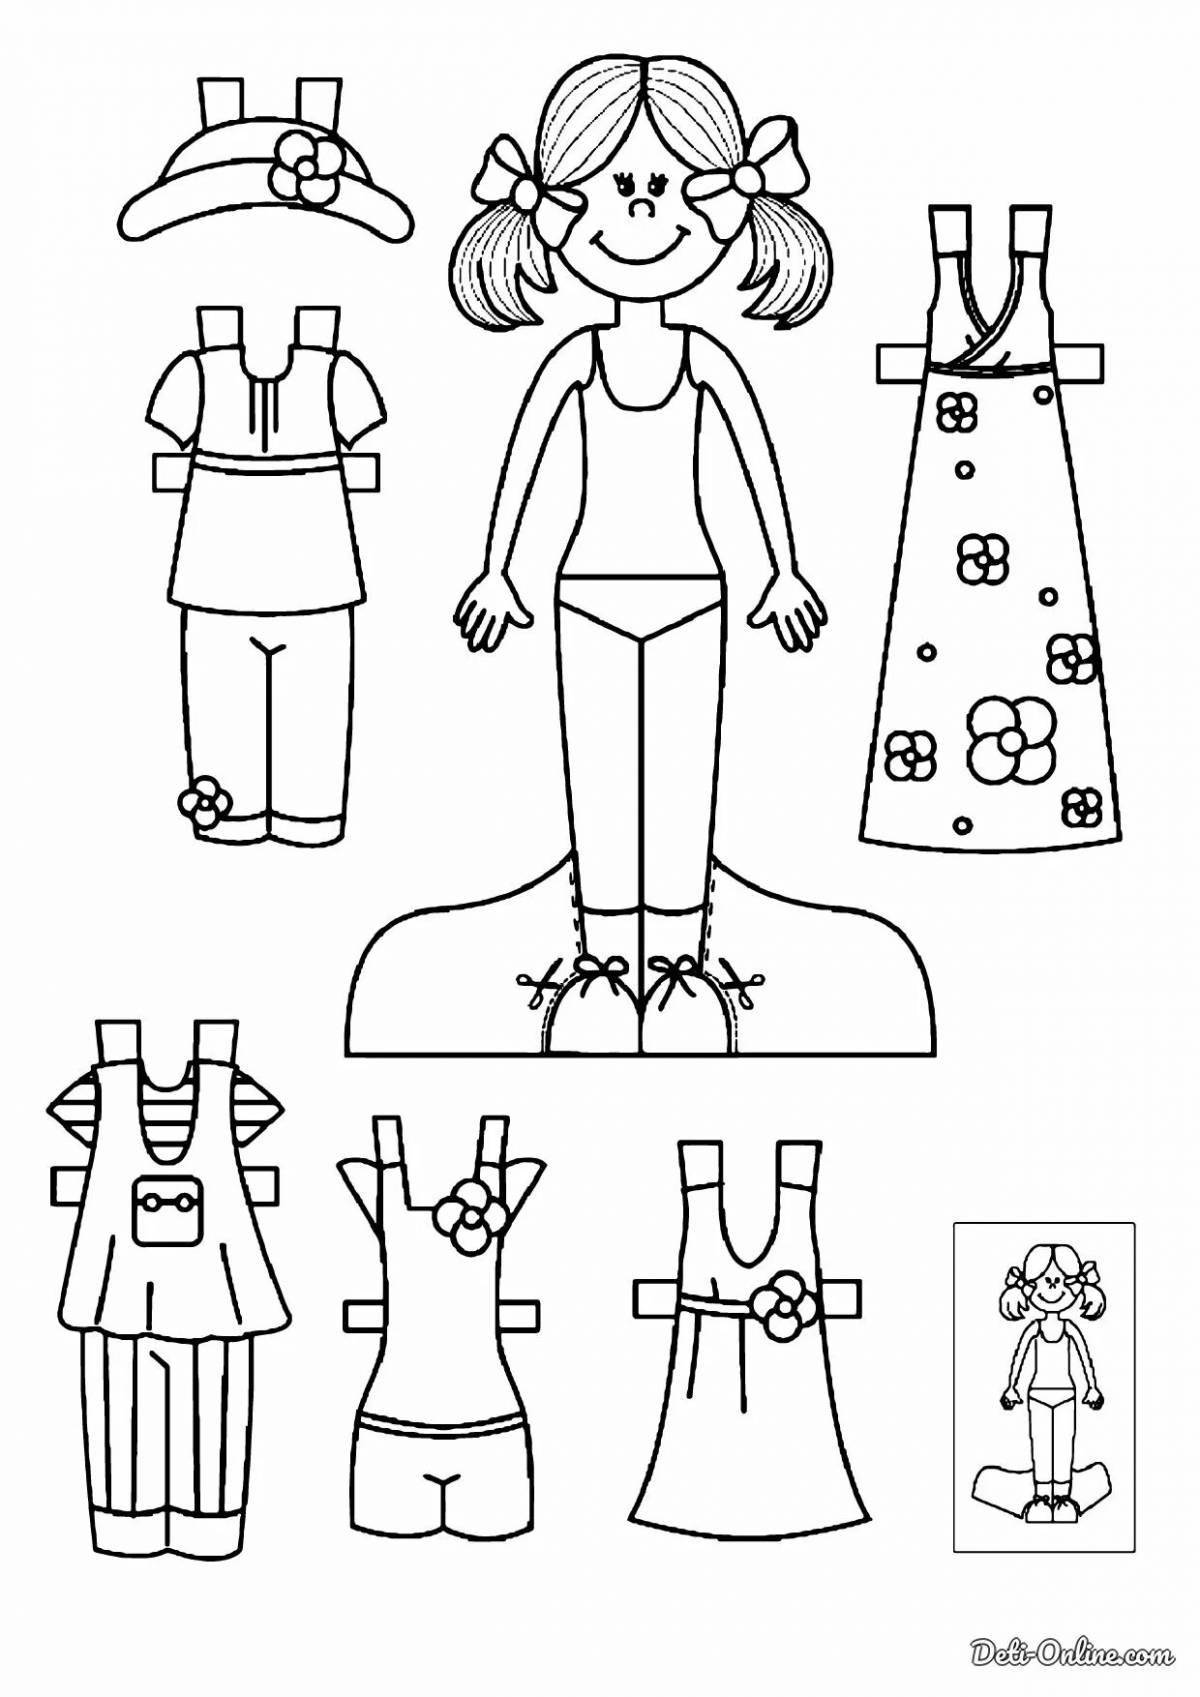 Coloring page of joyful doll outfit